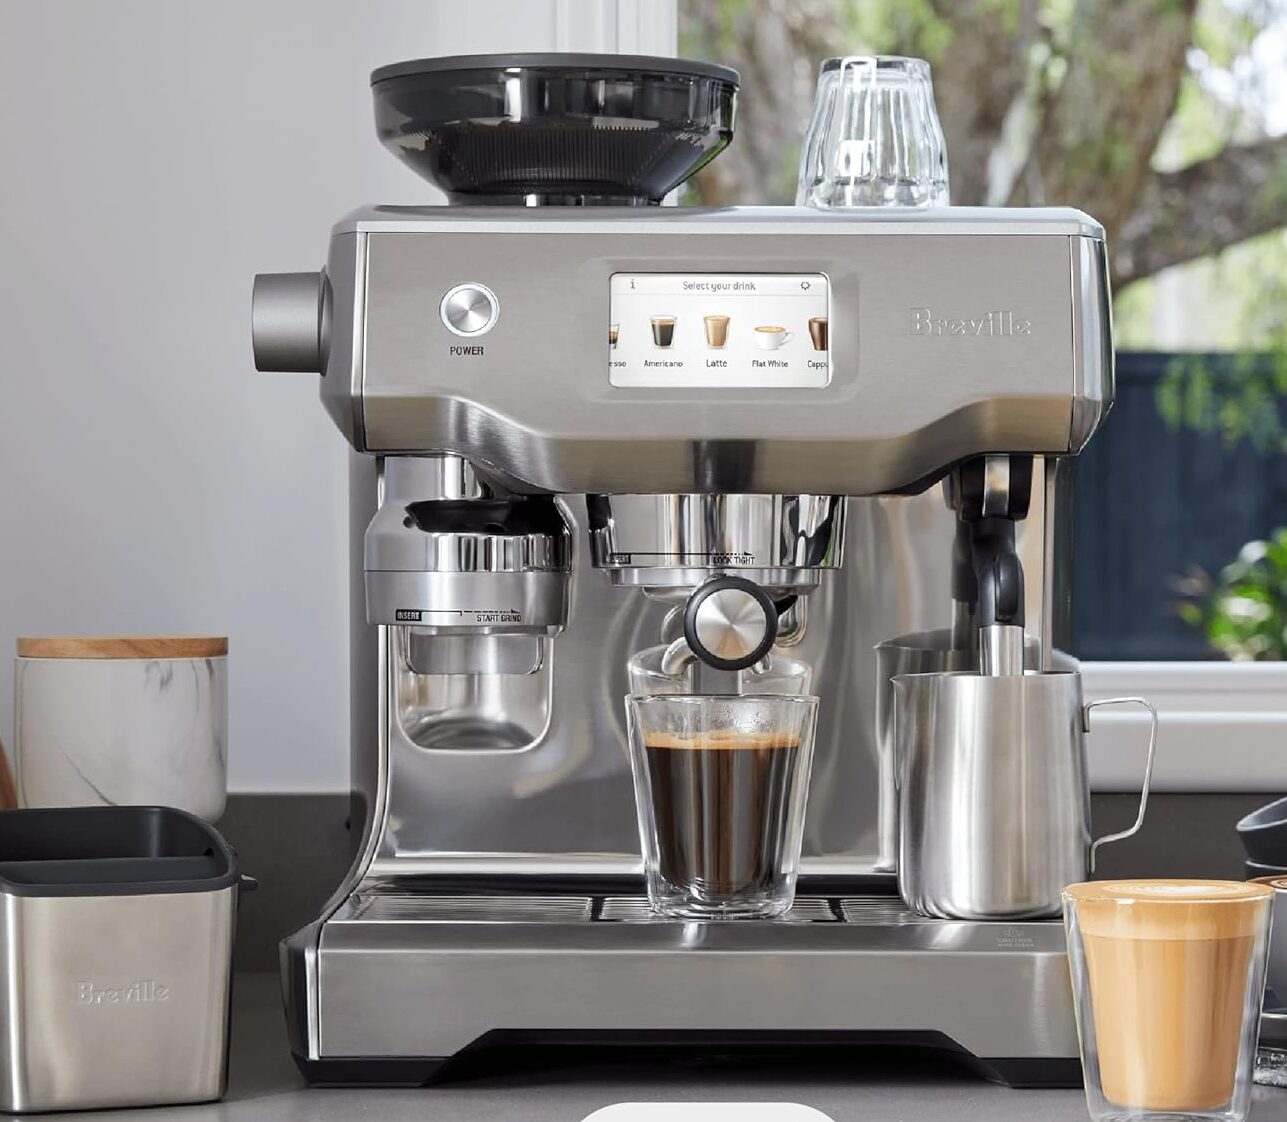 The Ultimate Your Espresso Experience At Home